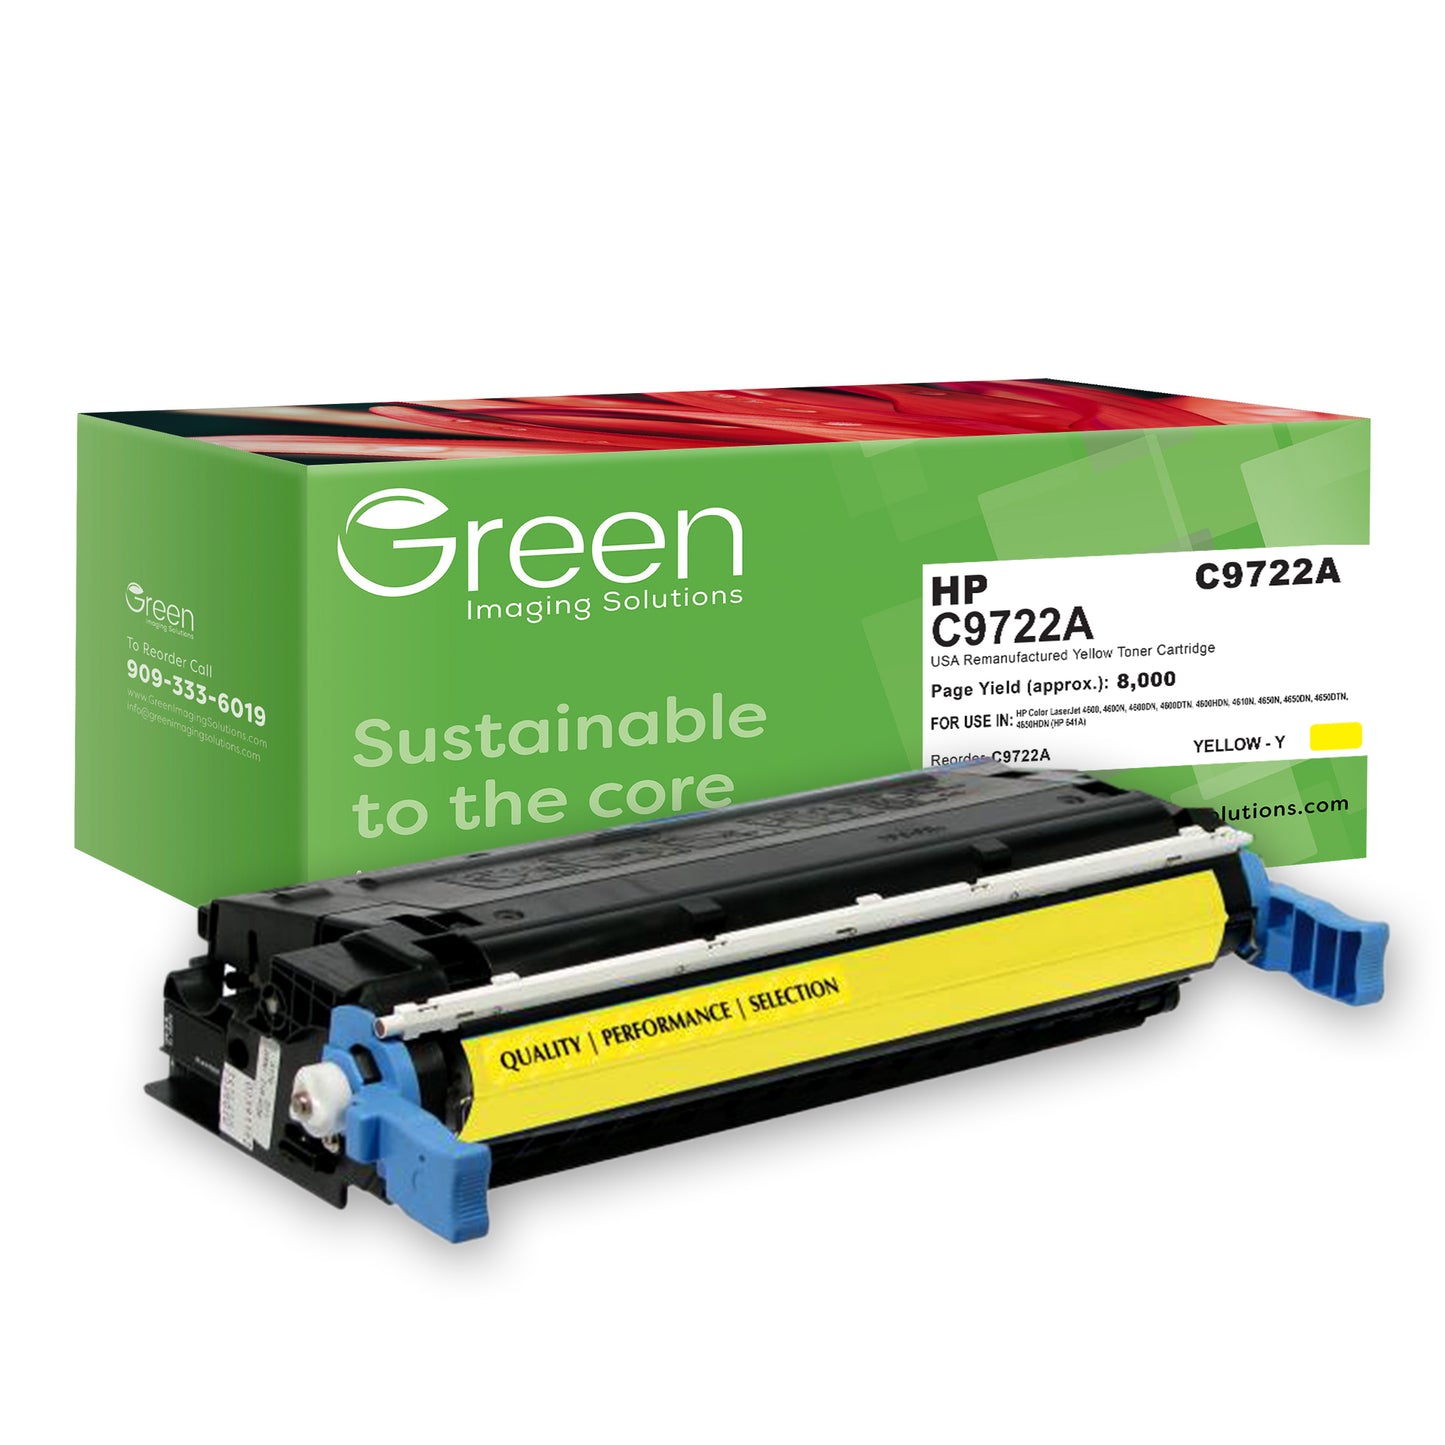 GIS USA Remanufactured Yellow Toner Cartridge for HP C9722A (HP 641A)